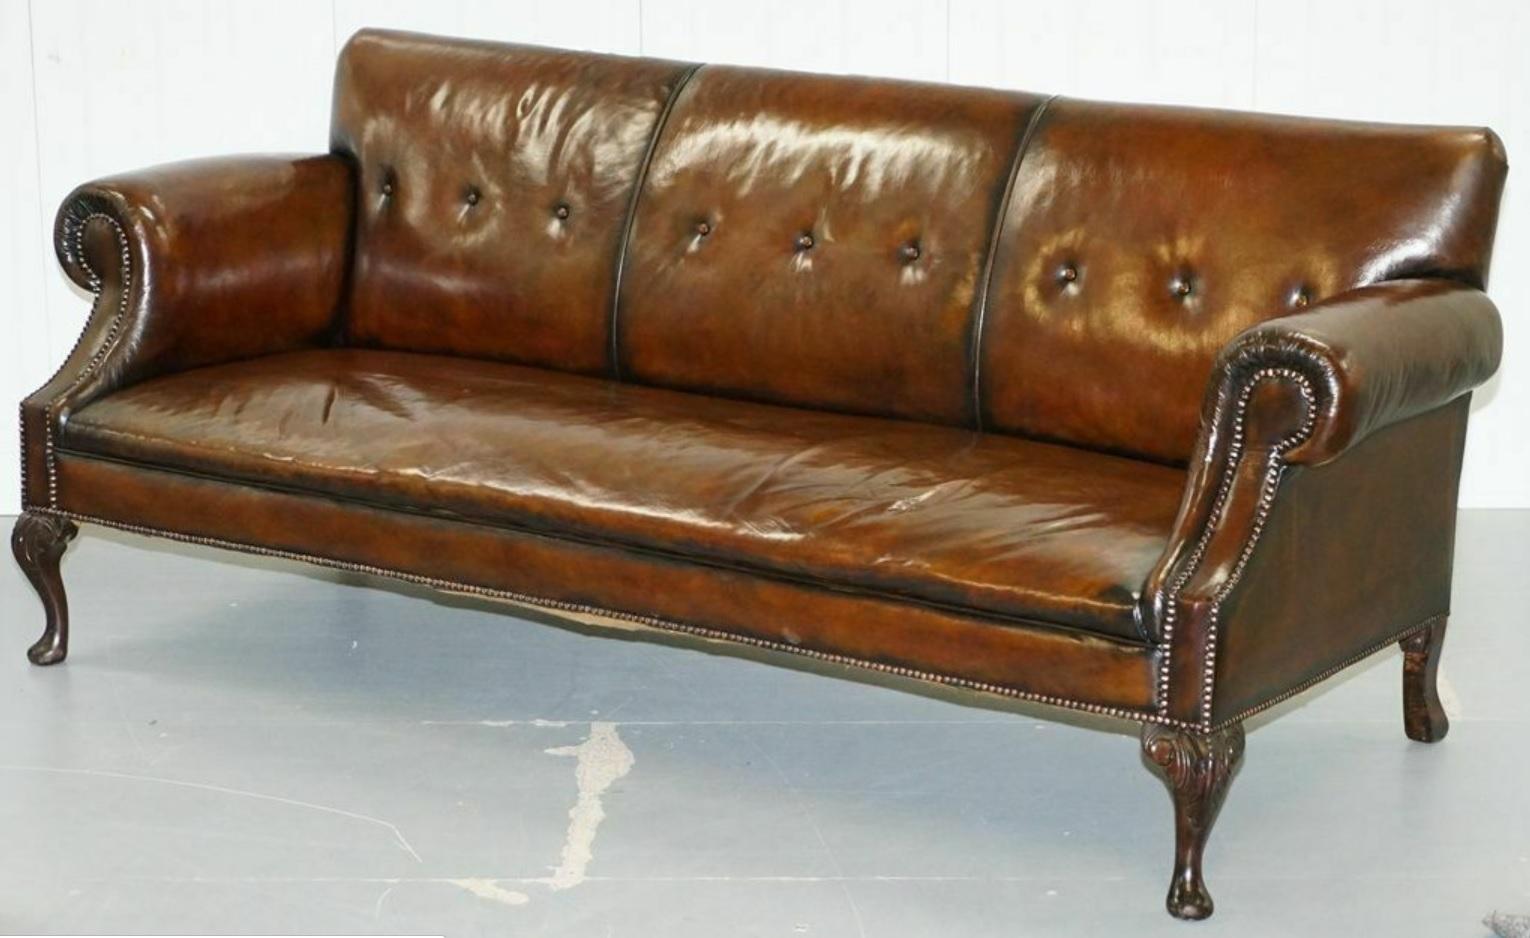 We are delighted to sale this stunning fully restored cigar brown leather chesterfield three-seat sofa

This sofa is in lovely fully restored condition, quite simple and understated by design however if you look closely it has nice detailing, the